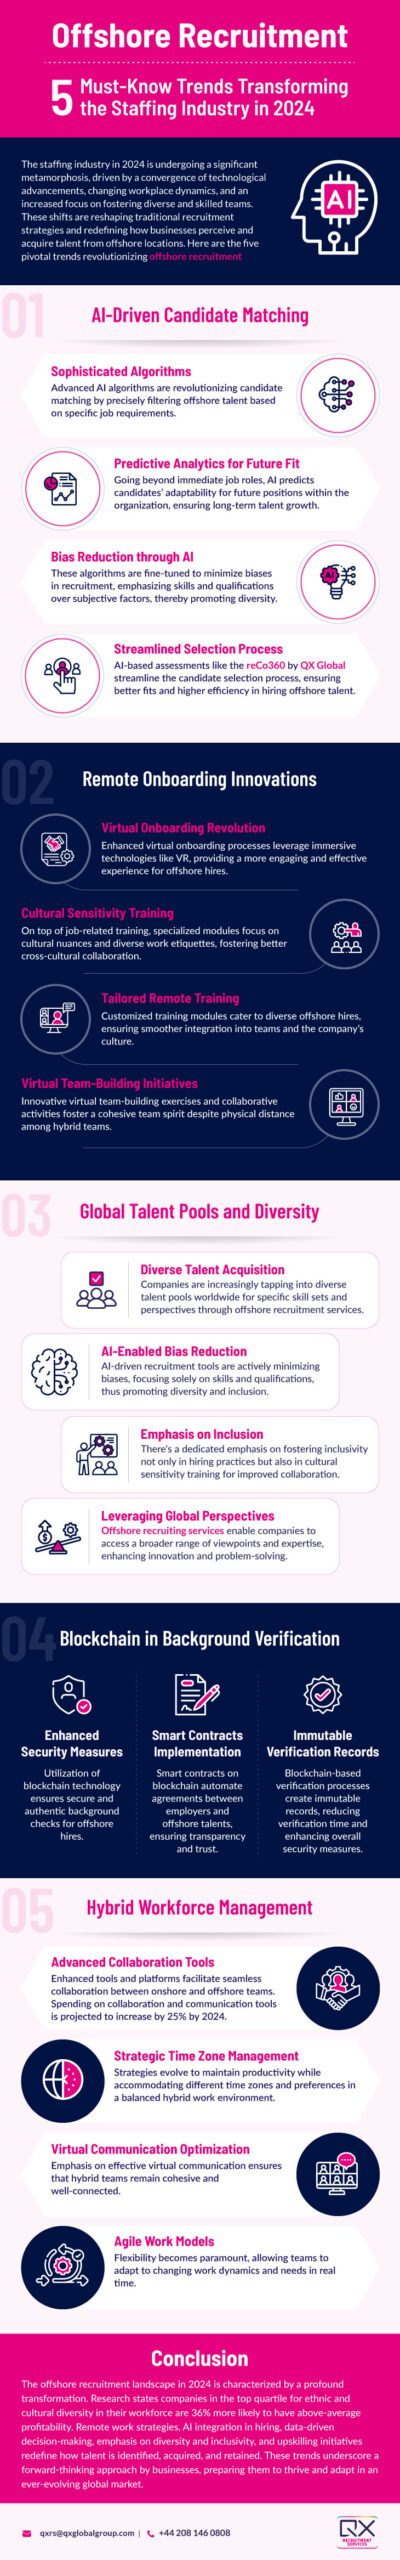 Offshore Recruitment: 5 Must-Know Trends Transforming the Staffing Industry in 2024 